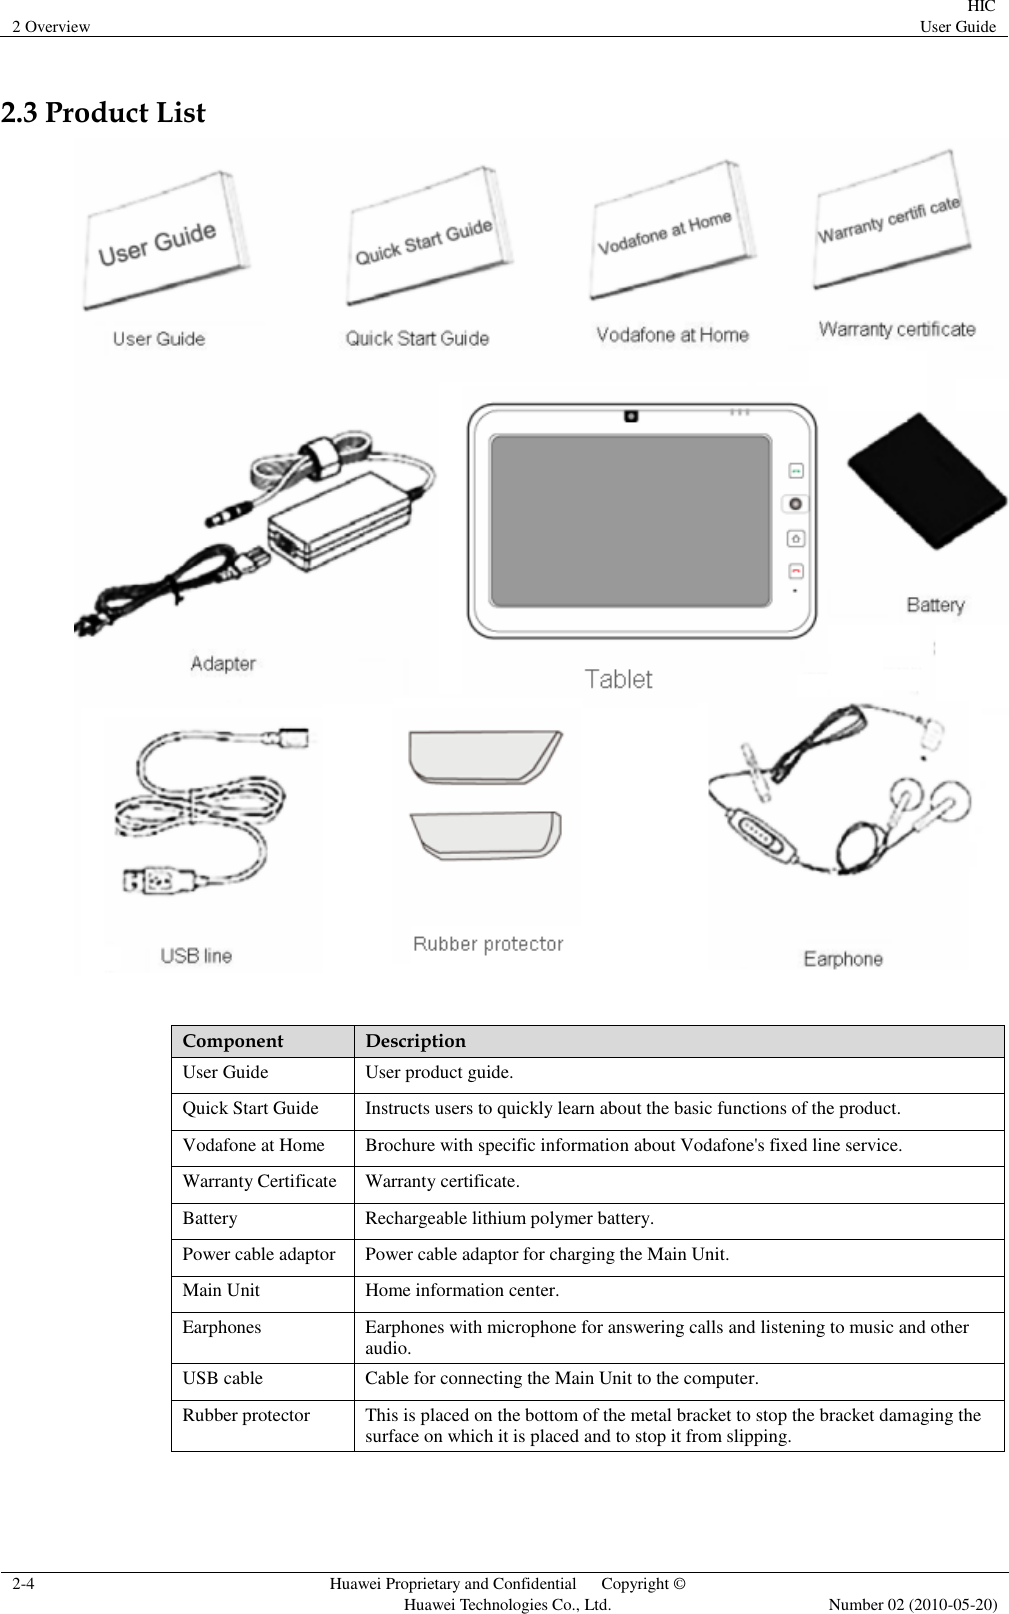 2 Overview HIC User Guide  2-4 Huawei Proprietary and Confidential      Copyright © Huawei Technologies Co., Ltd.  Number 02 (2010-05-20)  2.3 Product List   Component Description User Guide User product guide. Quick Start Guide Instructs users to quickly learn about the basic functions of the product. Vodafone at Home Brochure with specific information about Vodafone&apos;s fixed line service. Warranty Certificate Warranty certificate. Battery Rechargeable lithium polymer battery. Power cable adaptor Power cable adaptor for charging the Main Unit. Main Unit Home information center. Earphones Earphones with microphone for answering calls and listening to music and other audio. USB cable Cable for connecting the Main Unit to the computer. Rubber protector This is placed on the bottom of the metal bracket to stop the bracket damaging the surface on which it is placed and to stop it from slipping. 